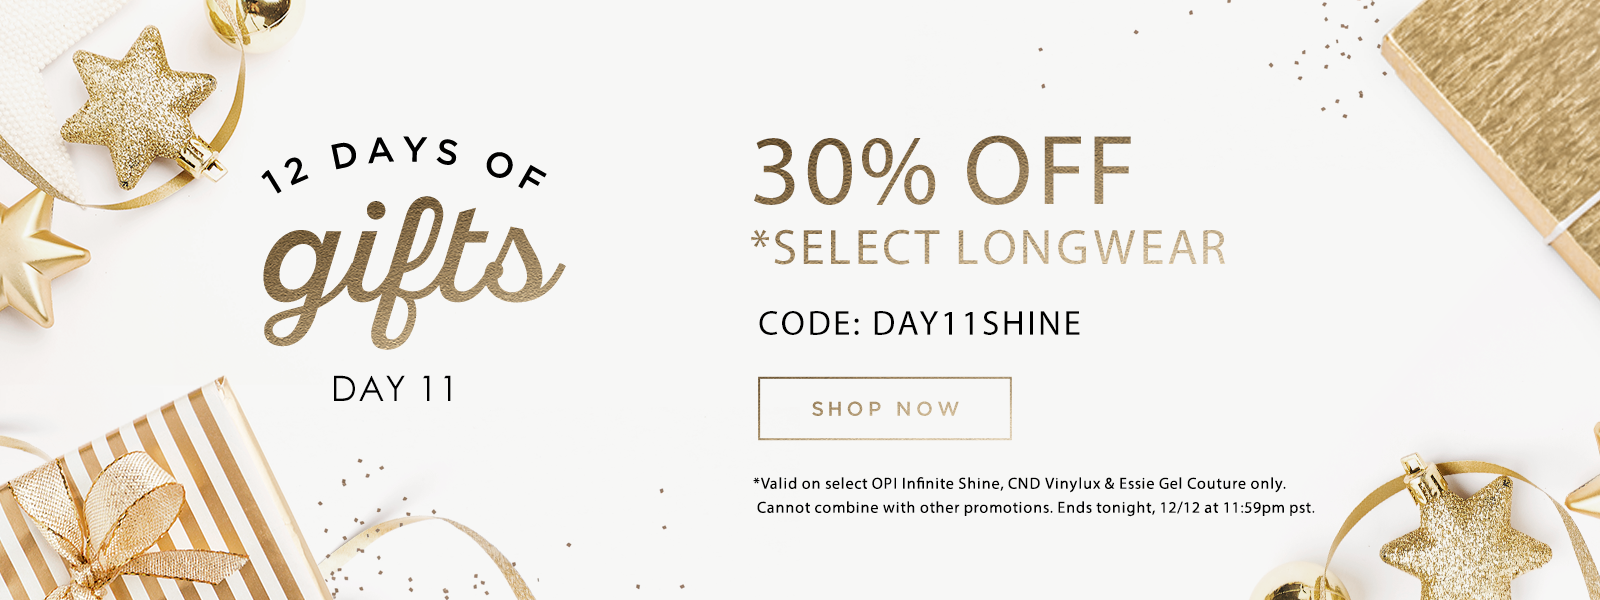 12 Days of Gifts: Day 11 - 30% Off Select Longwear